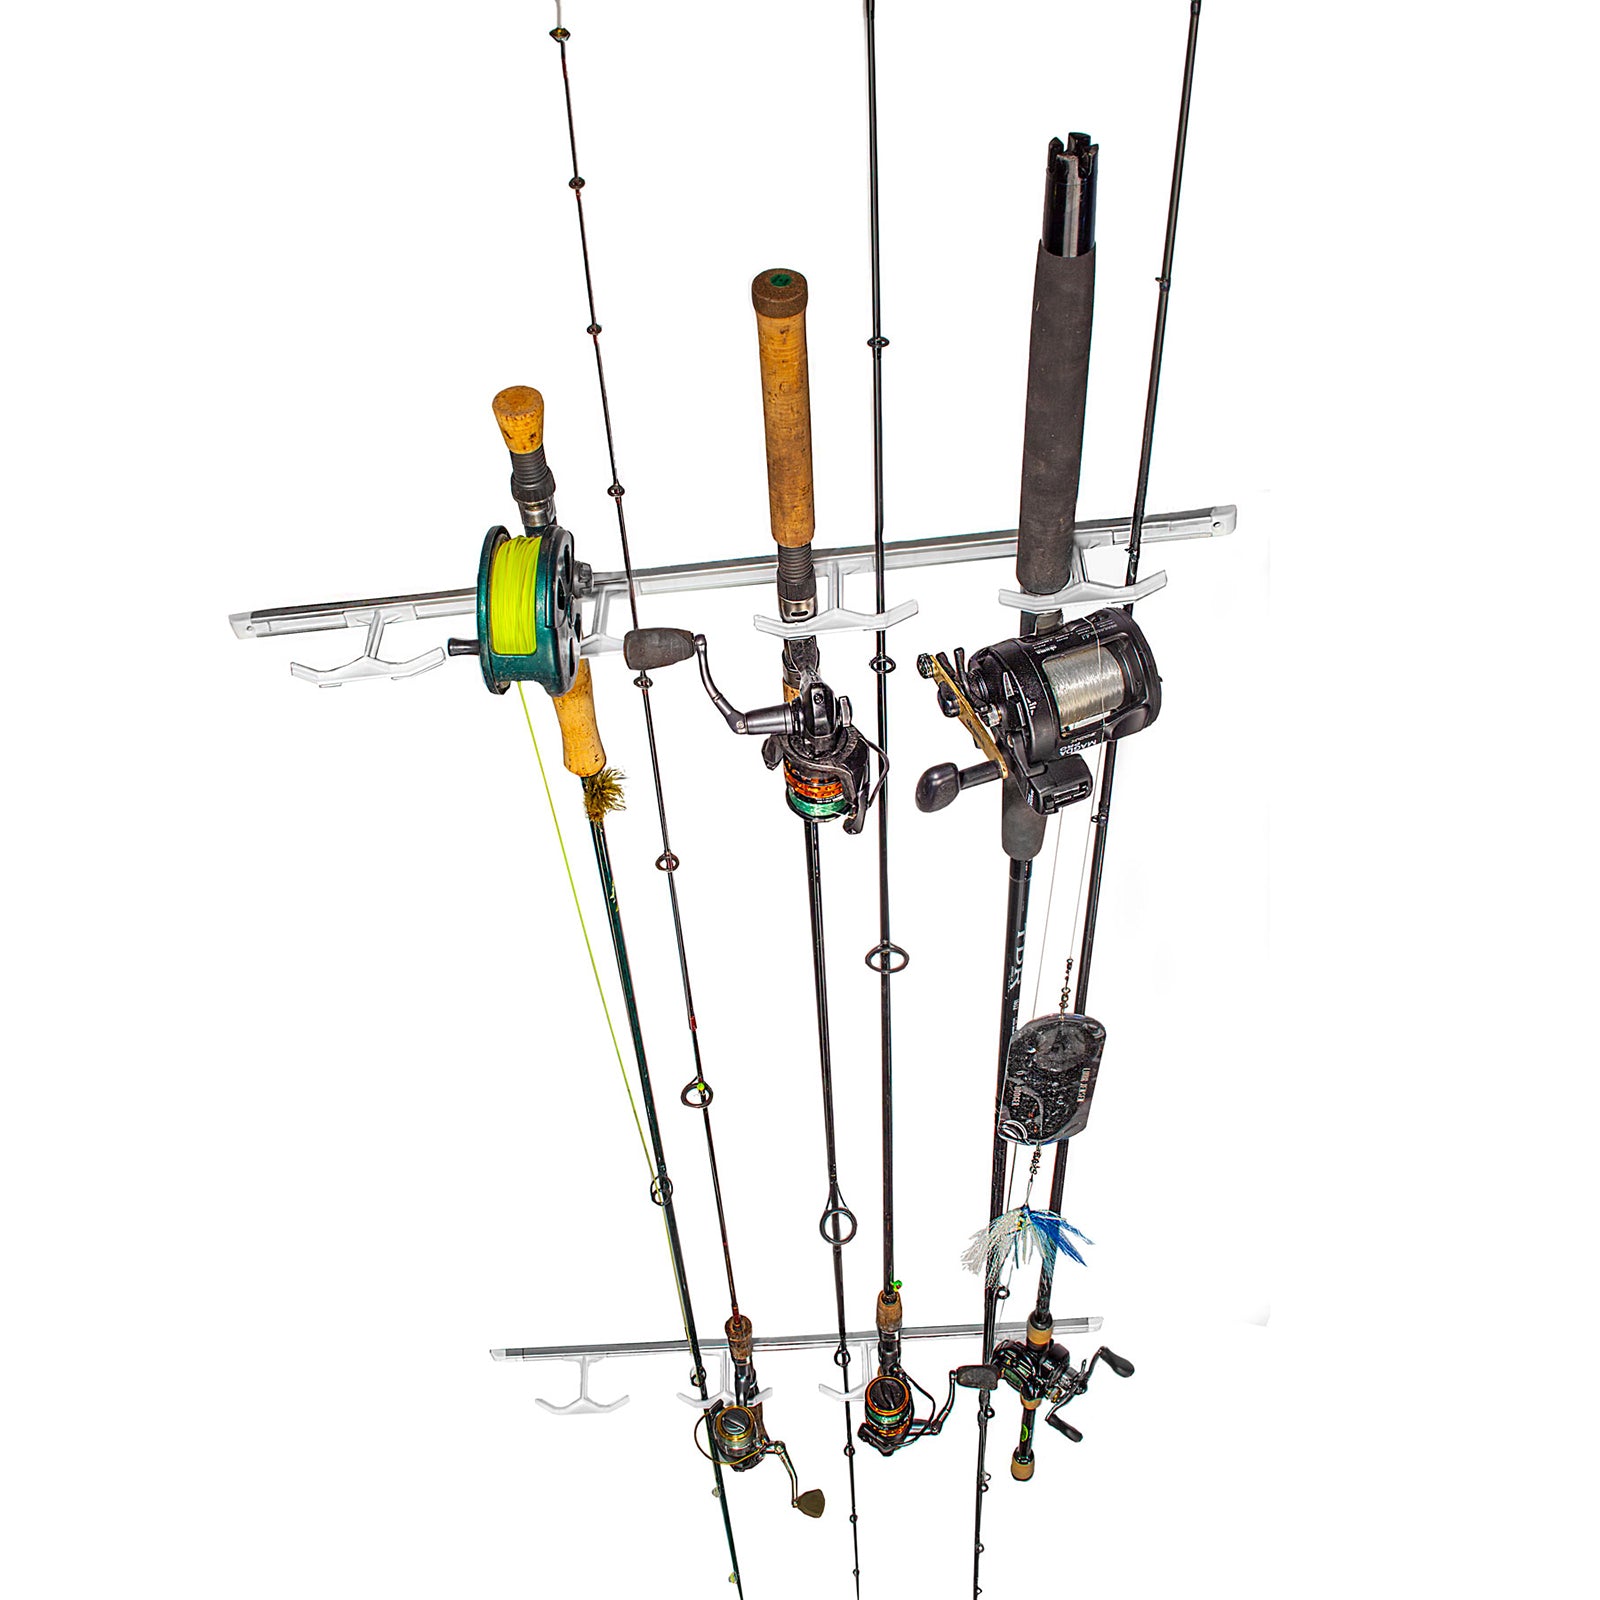 Fishing pole holder, holds poles against the ceiling out of the